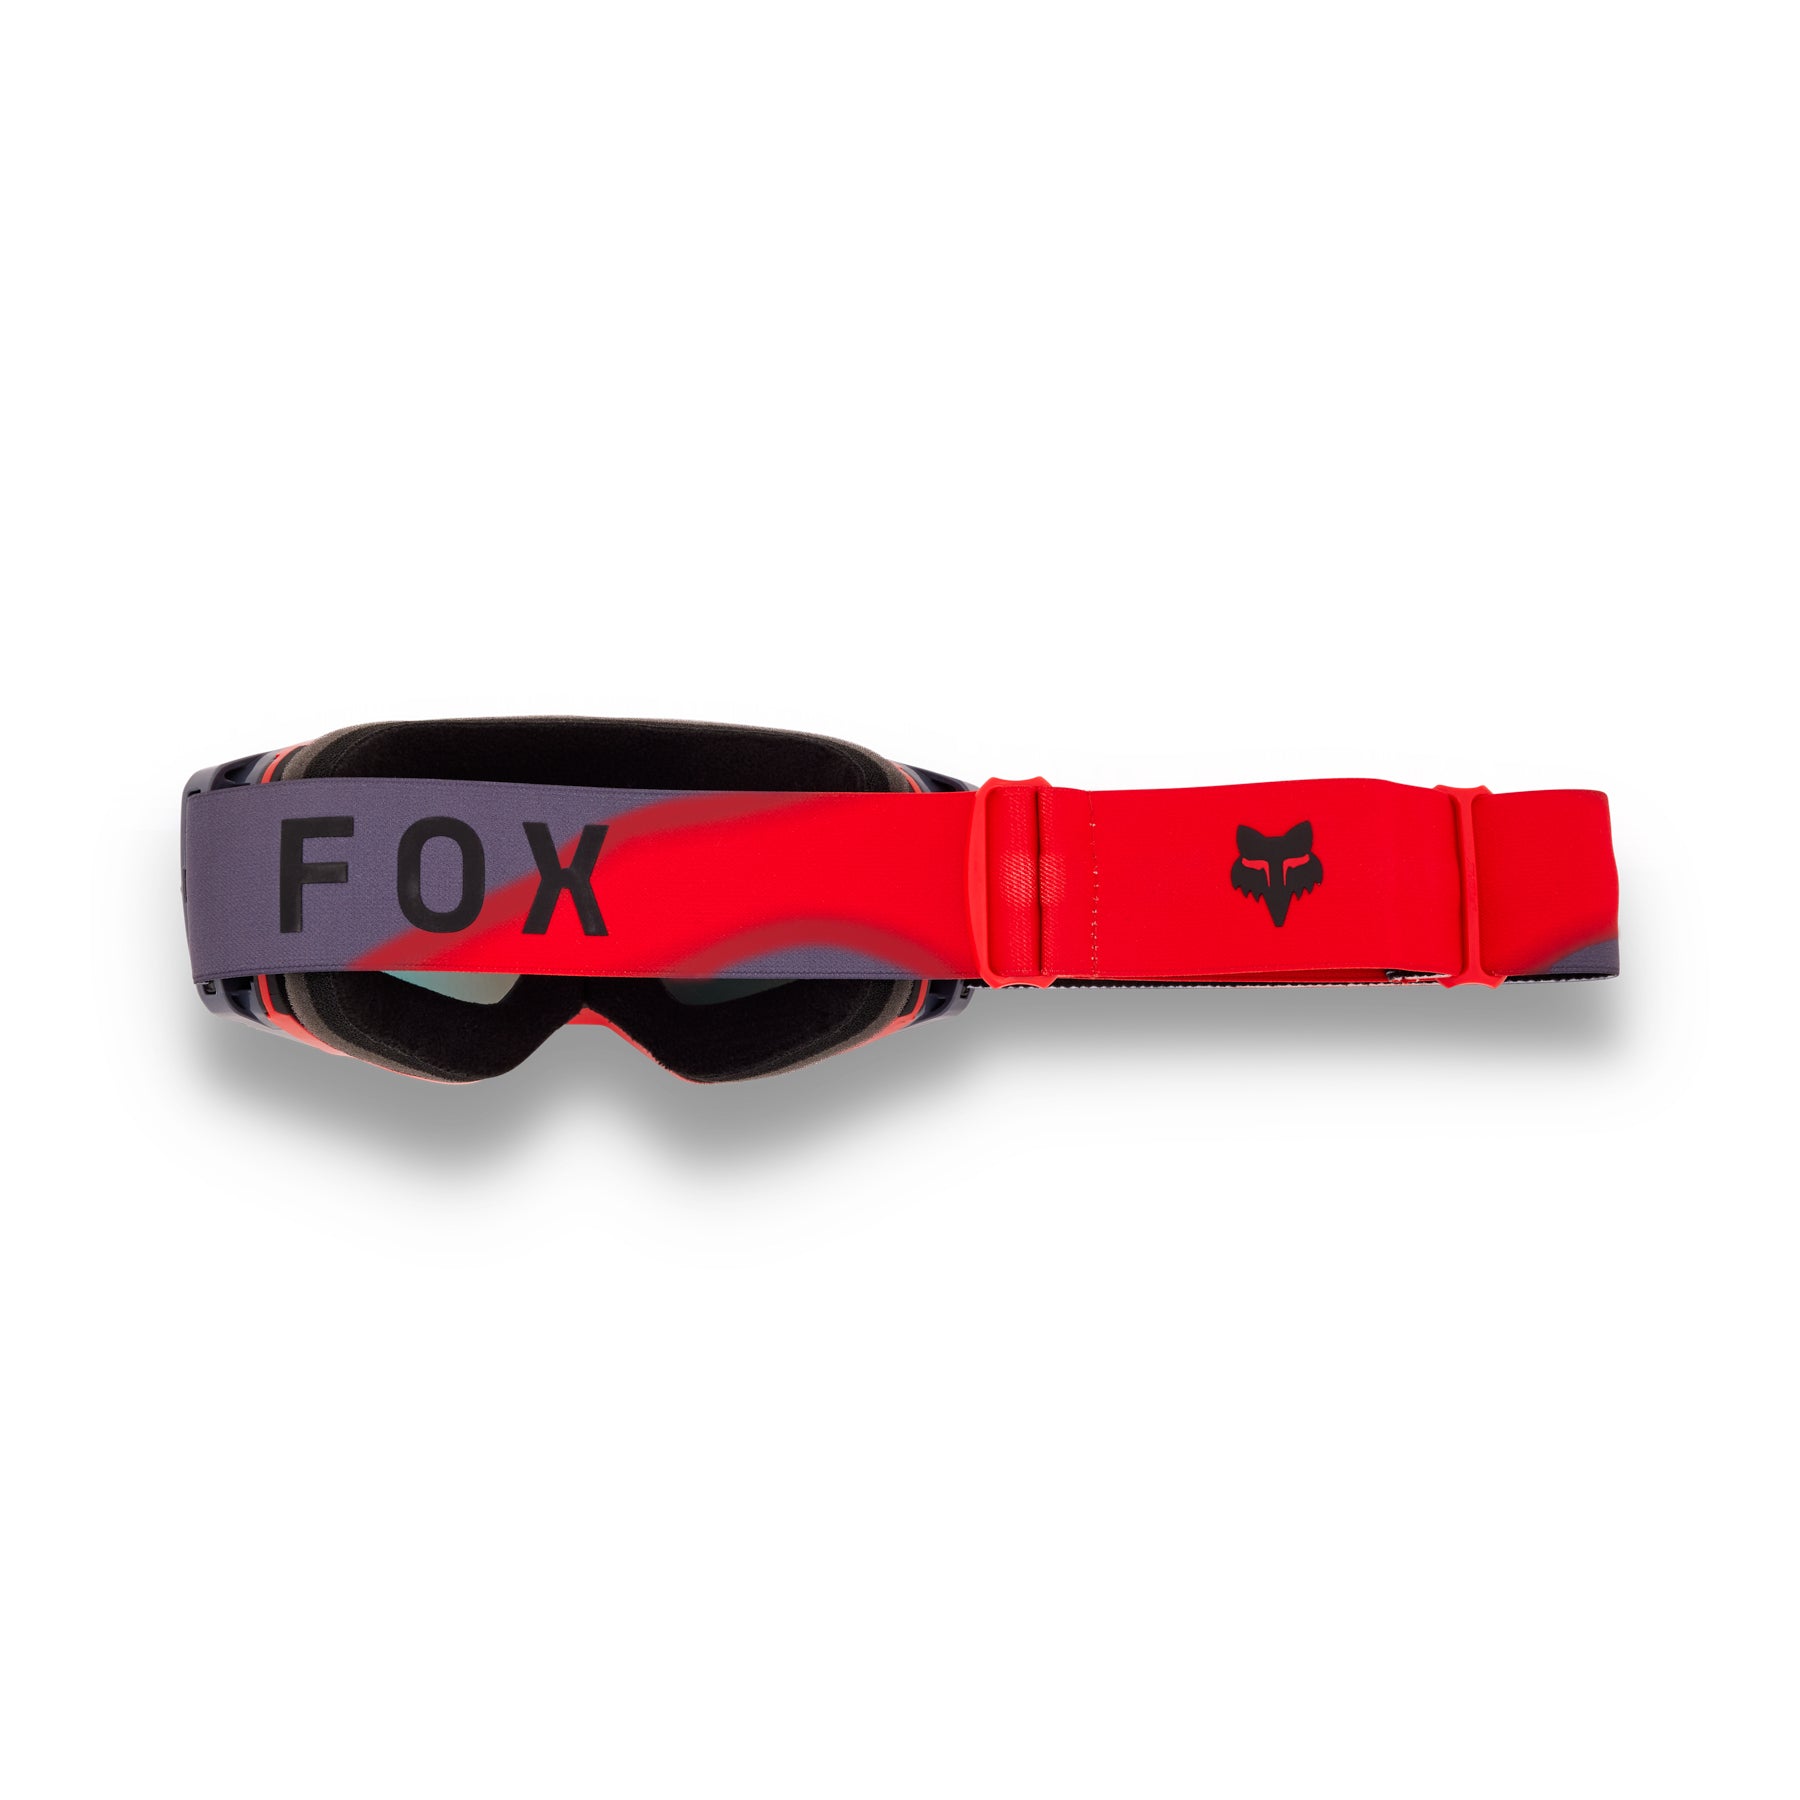 Fox Vue Volatile Goggles - One Size Fits Most - Flo Red - Spark Mirror Red Lens - Image 2